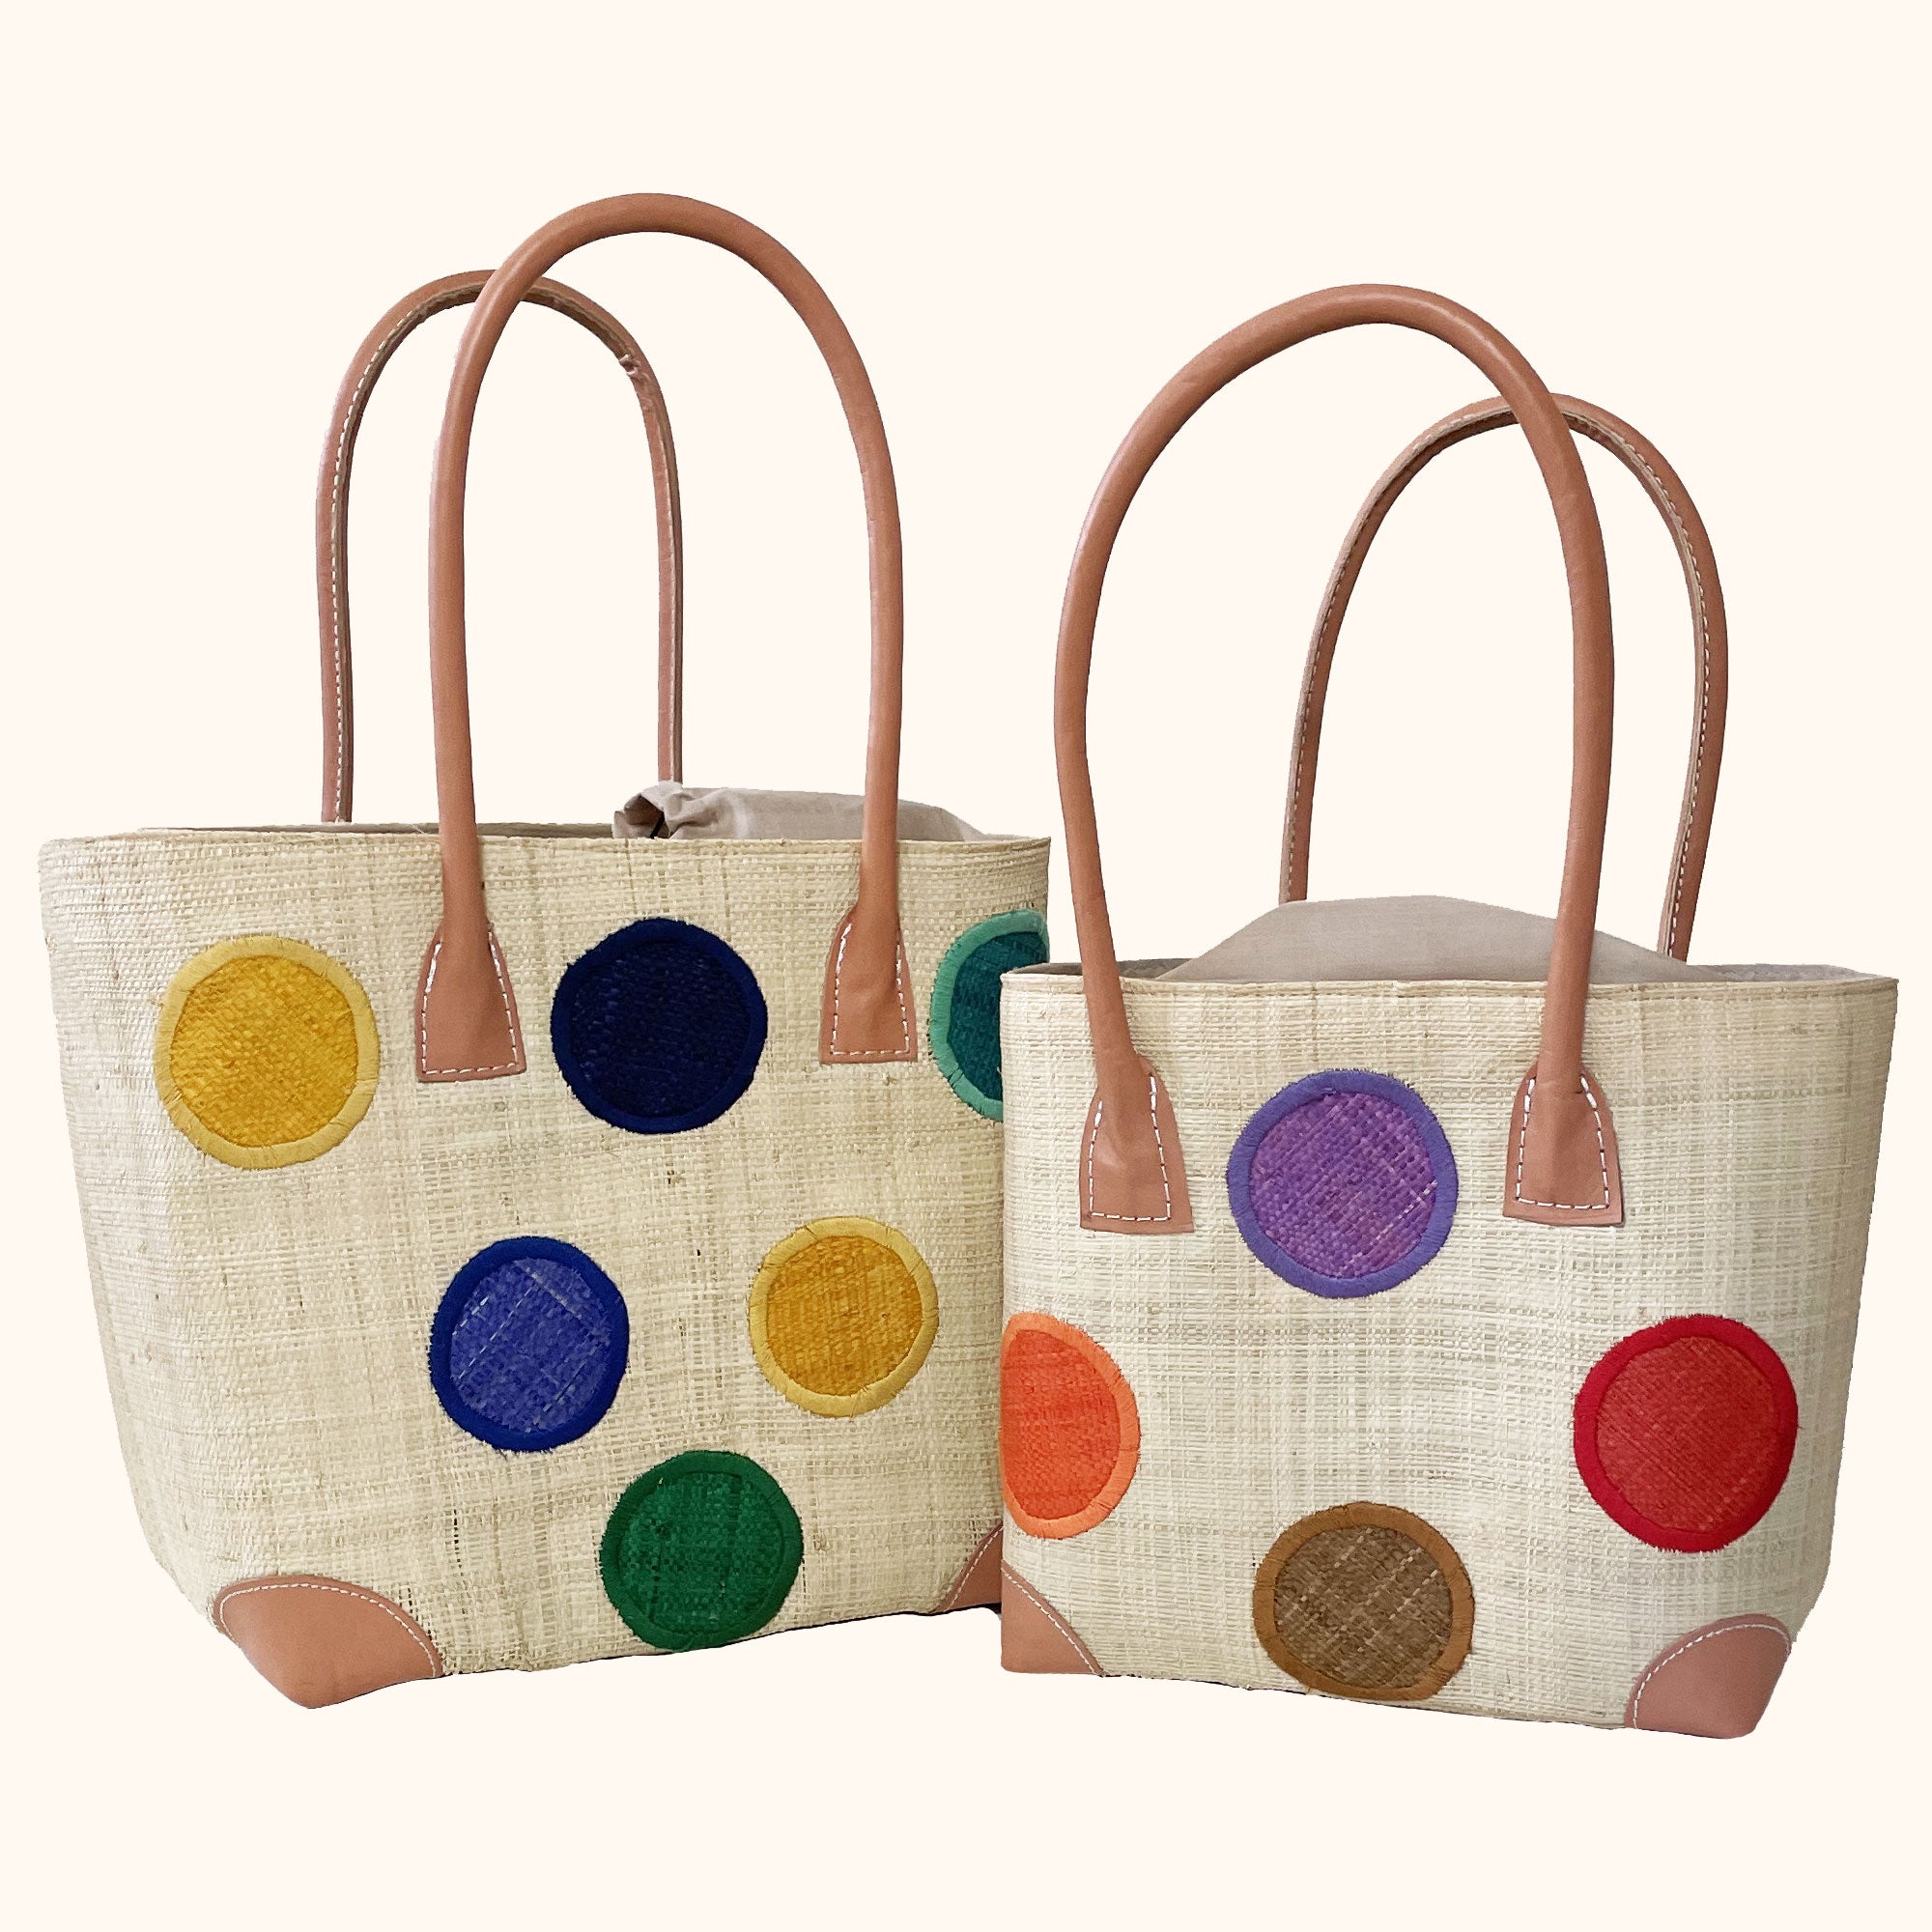 Small Circles Bag - The Nancy Smillie Shop - Art, Jewellery & Designer Gifts Glasgow